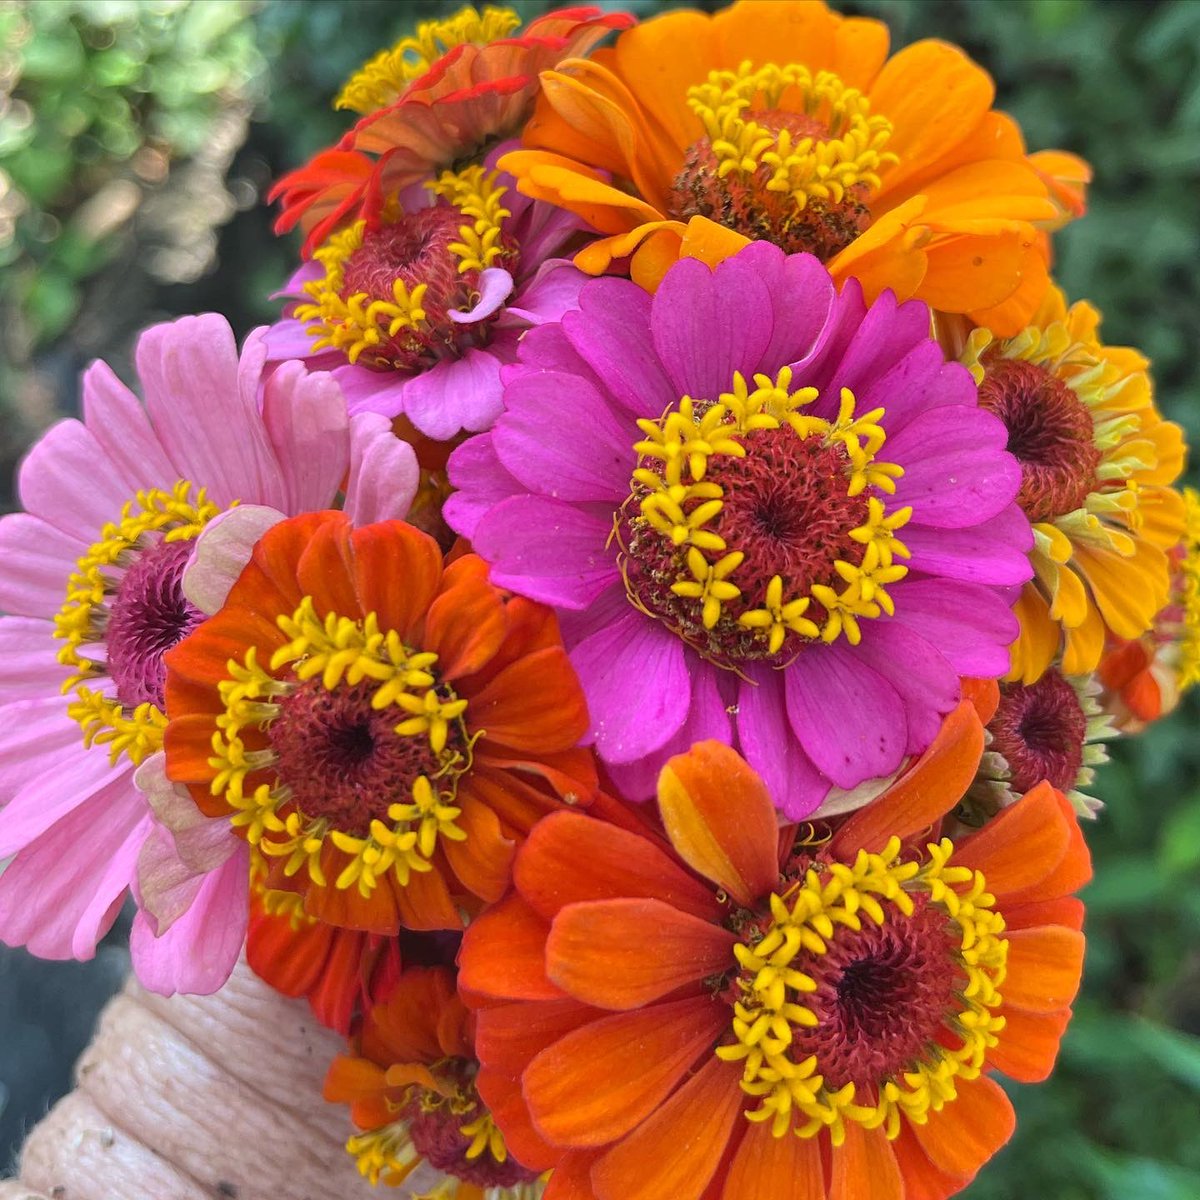 Happiness is cutting zinnia bouquets from our community garden plot. #gardendc #cuttinggarden #zinnias #annualflowers #picoftheday #nofilter